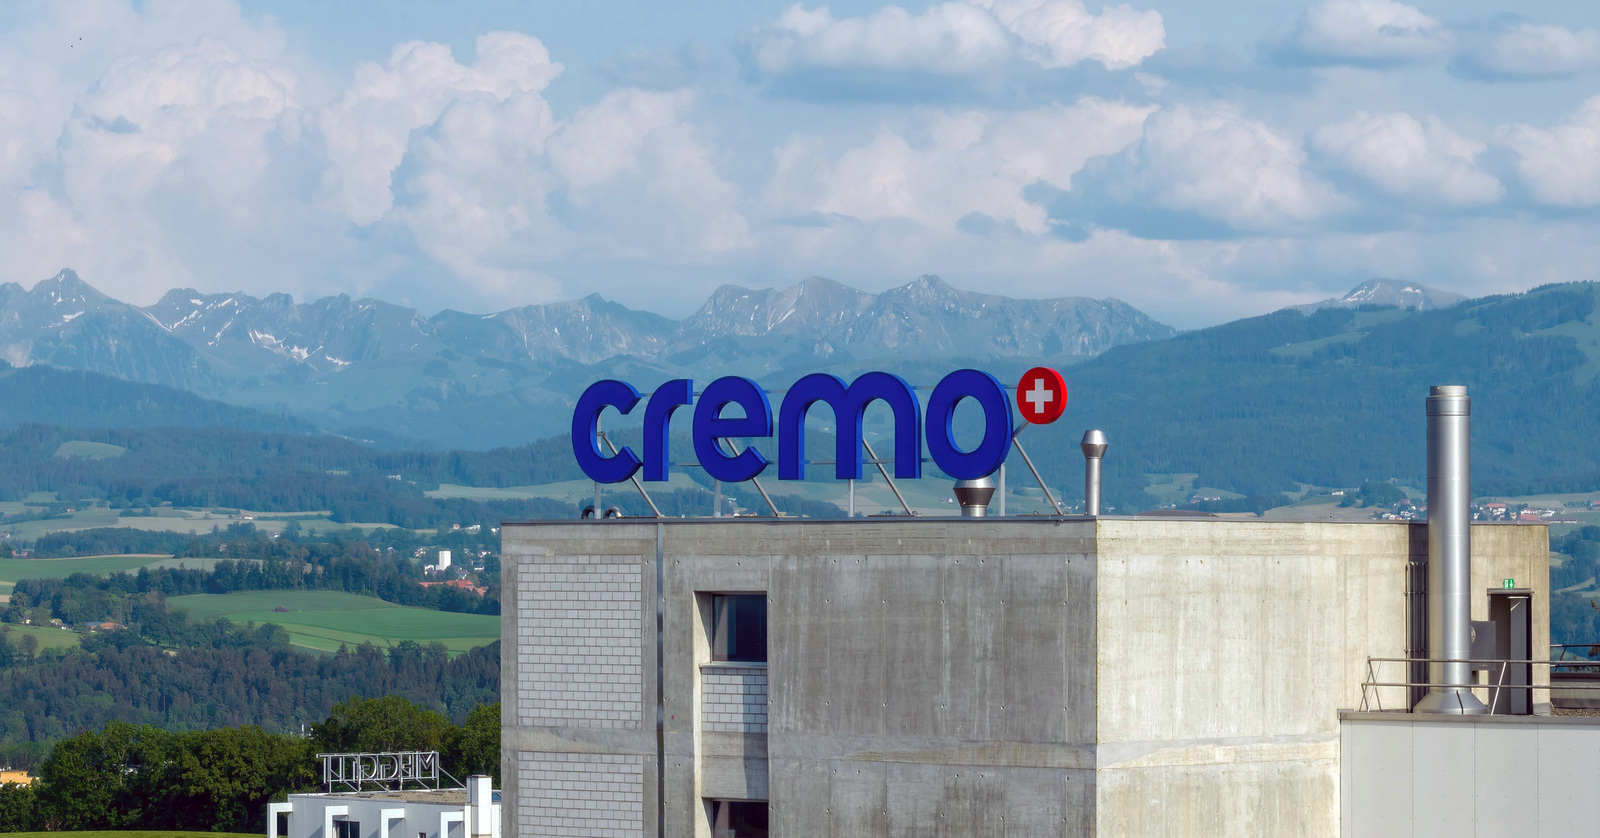 creamery with town and mountains in background